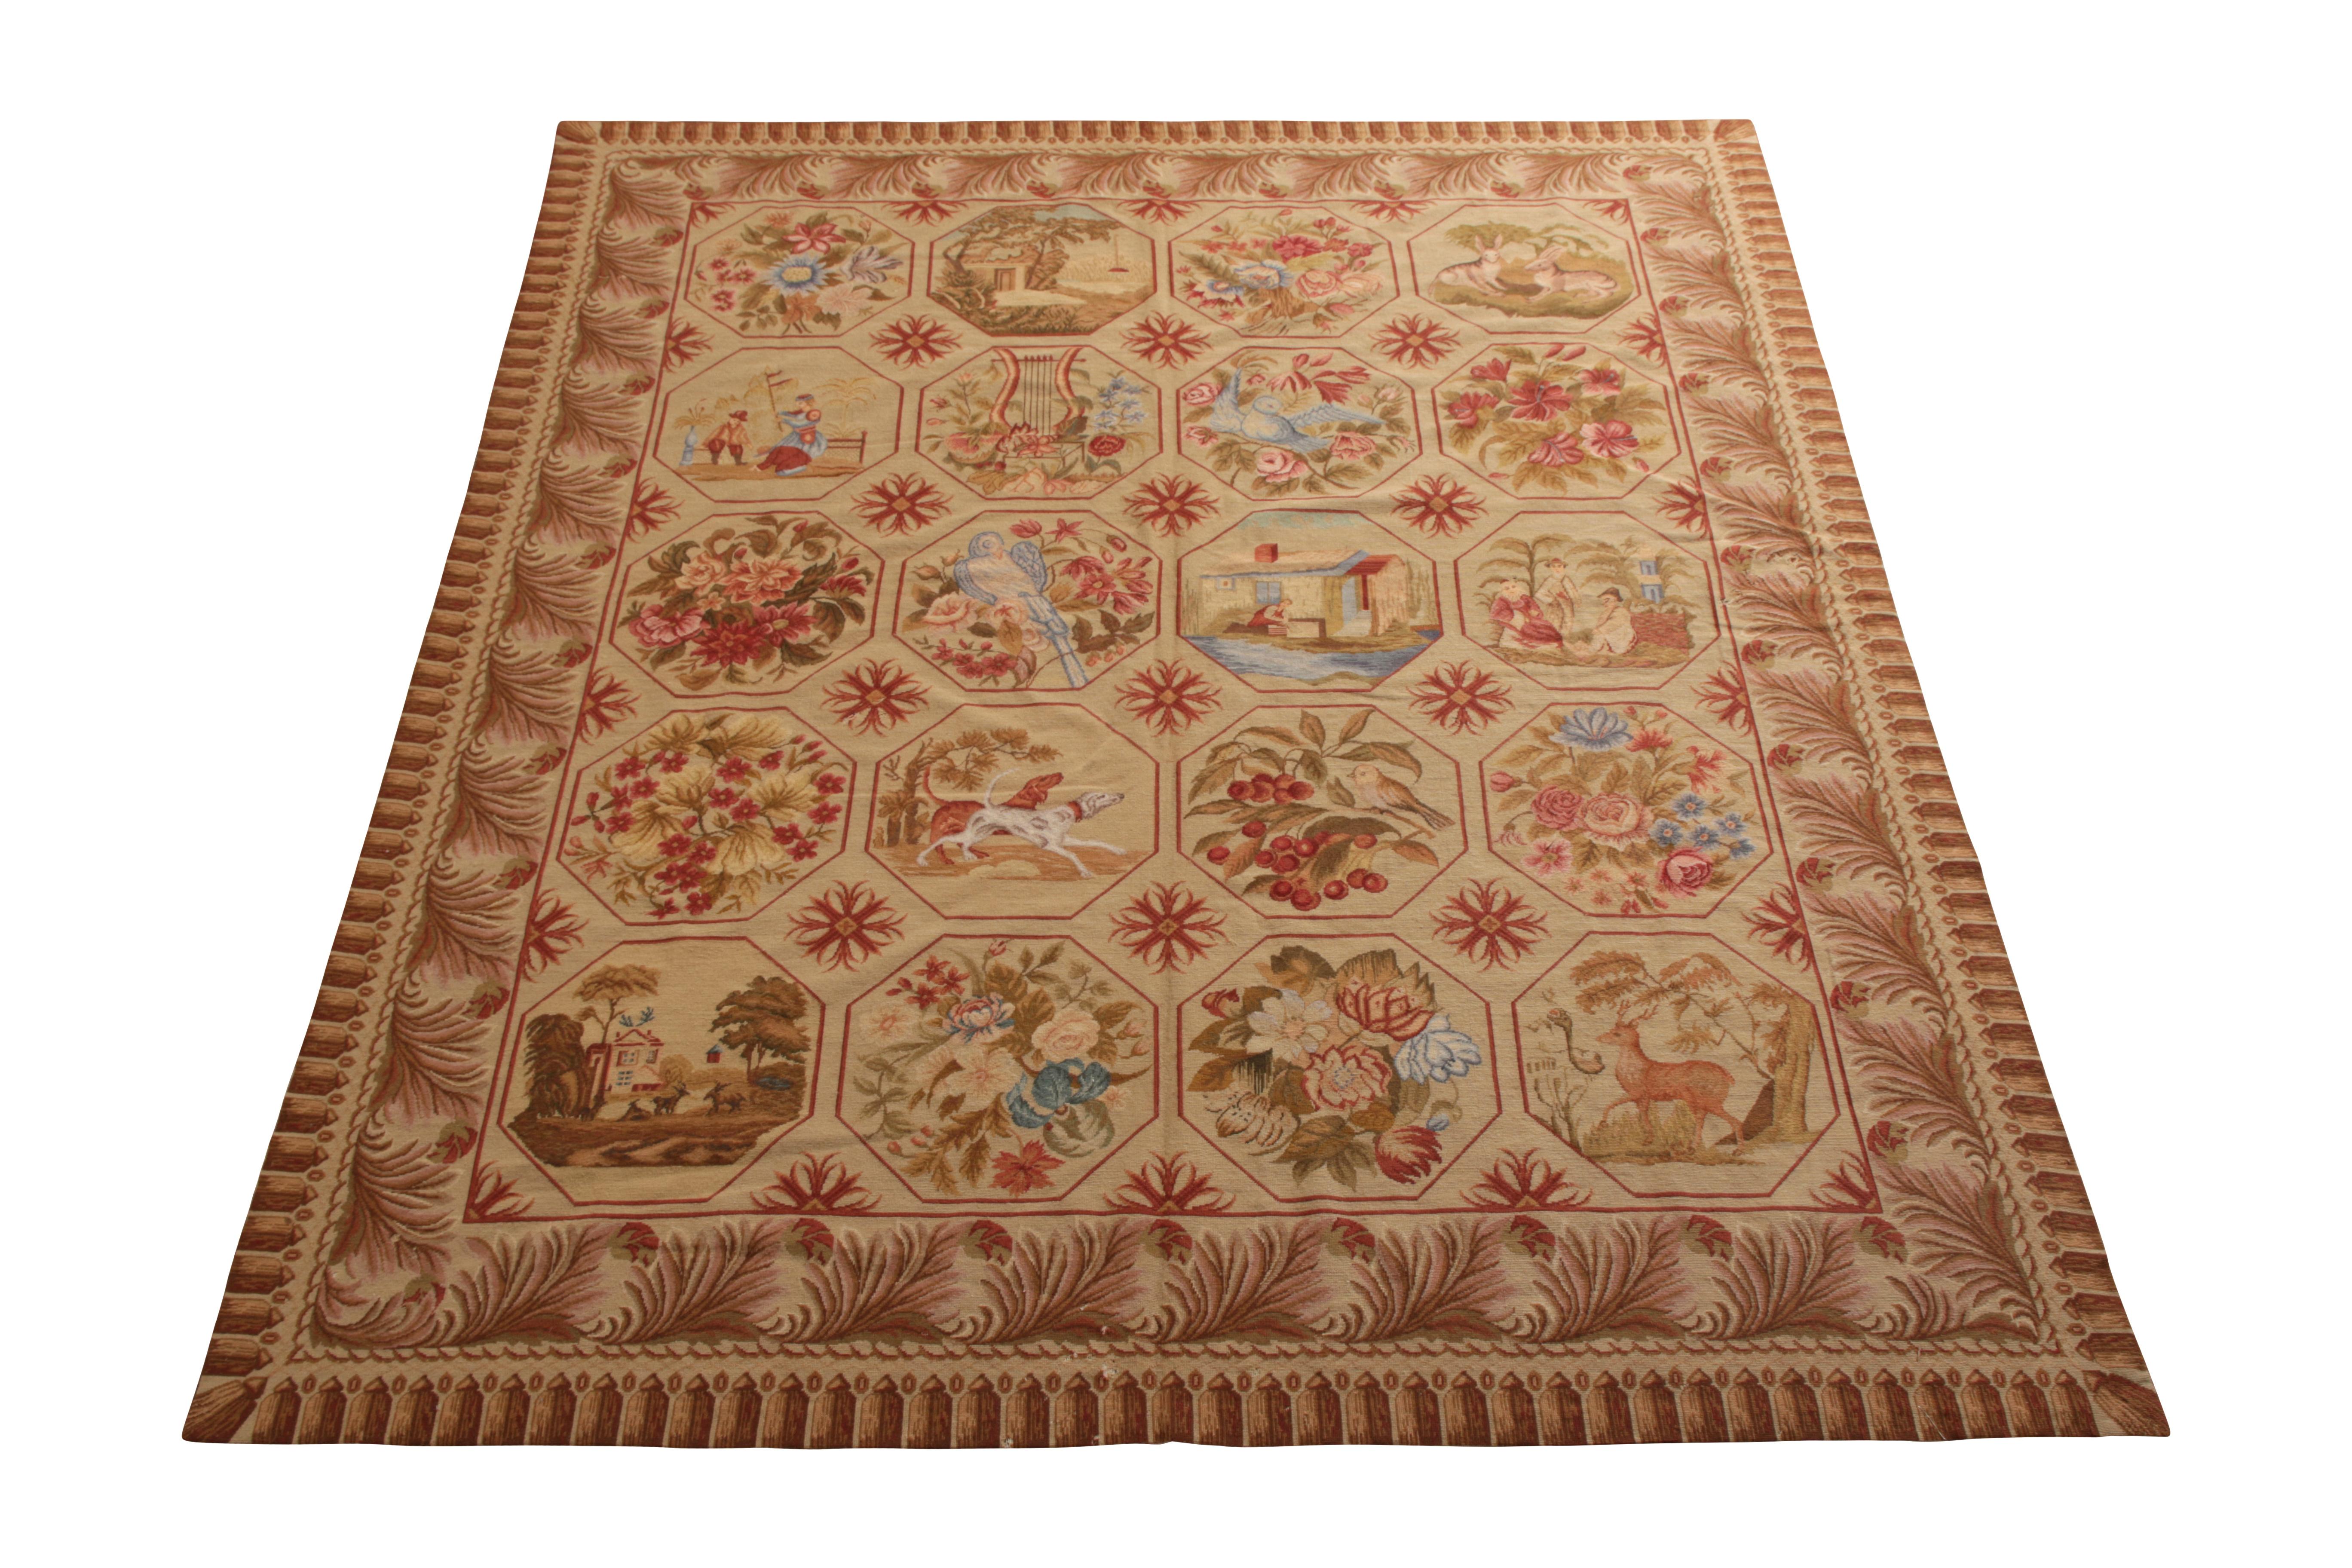 A 6x7 antique rug in needlepoint style, handmade in wool originating from China circa 1920-1930. Outstanding in its rare pictorial style, complemented by forgiving beige-brown, green, and red hues. Enjoying uniquely non-repeating medallions in the